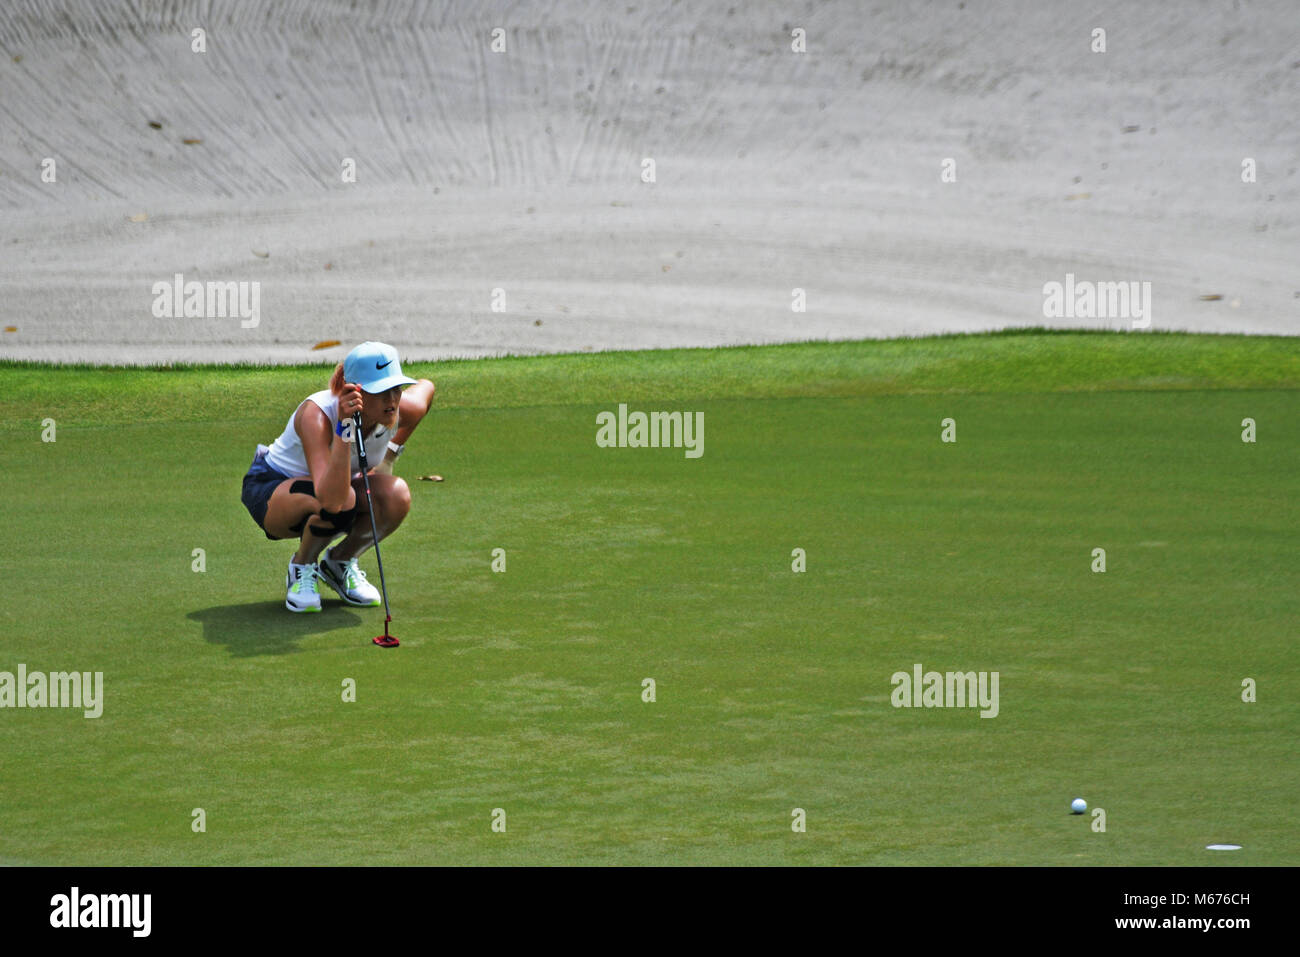 Singapore. 1st Mar, 2018. Michelle Wie of the United States competes during the first round of the HSBC Women's World Championship golf tournament in Singapore March 1, 2018. Credit: Then Chih Wey/Xinhua/Alamy Live News Stock Photo